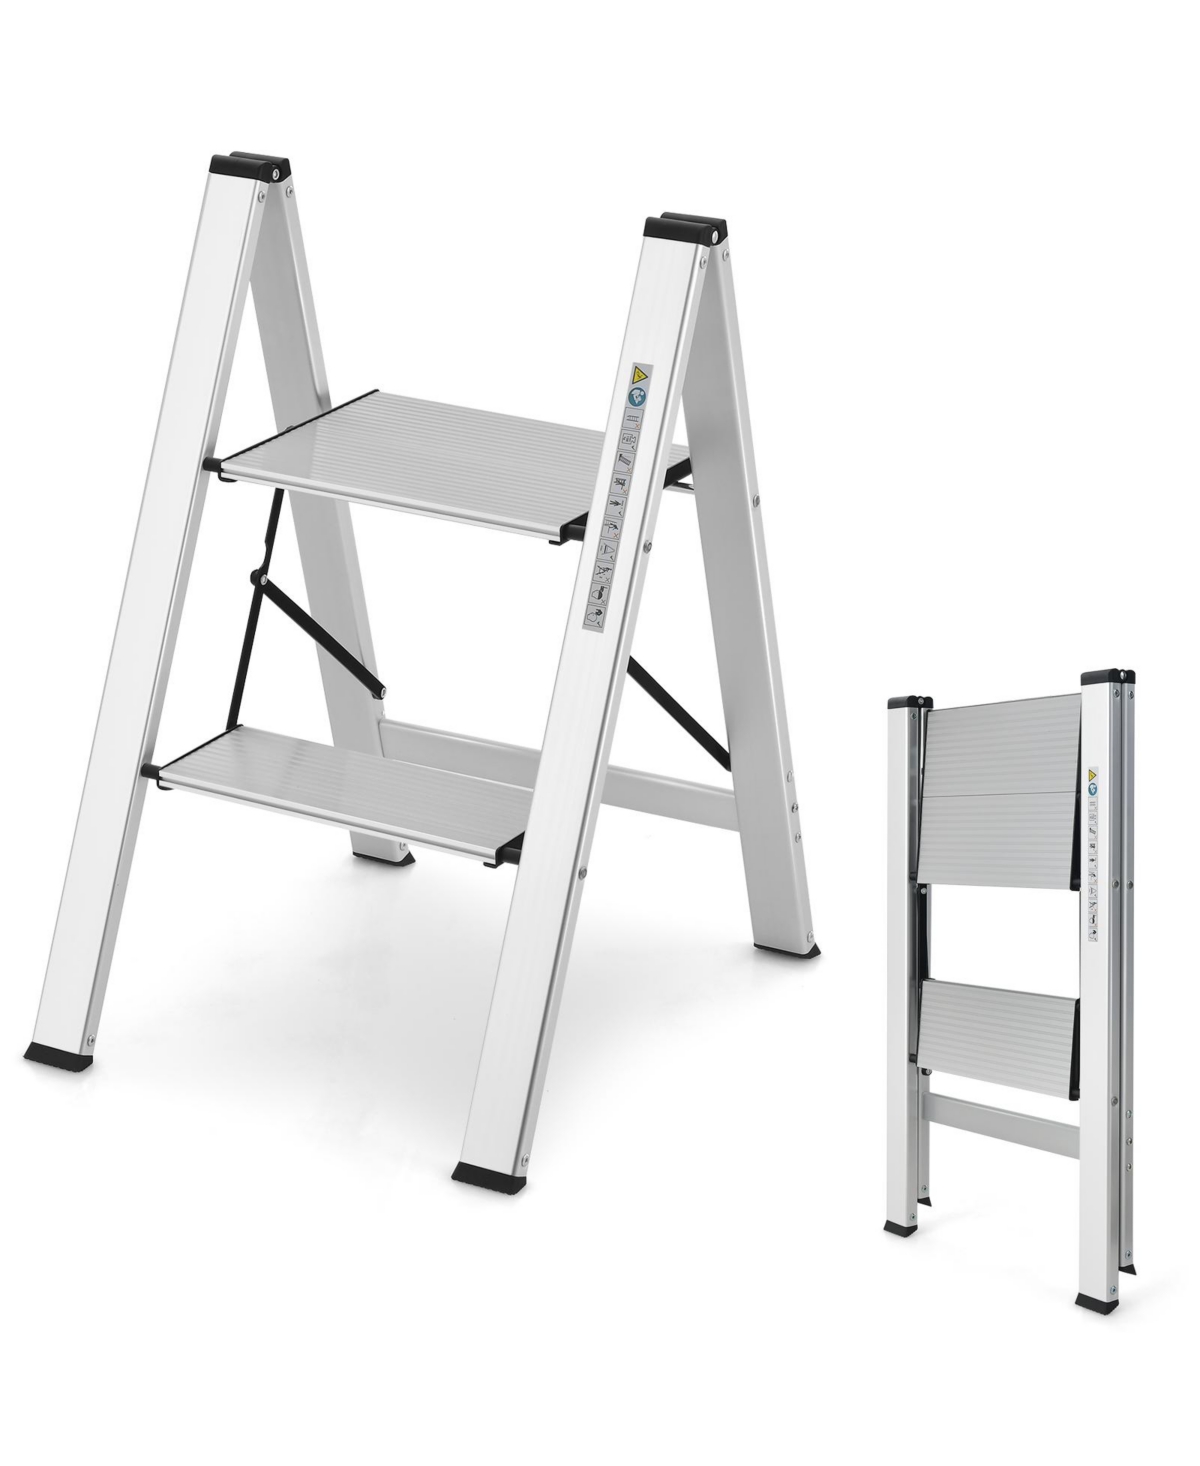 Folding Aluminum 2-Step Ladder with Non-Slip Pedal and Footpads - Silver